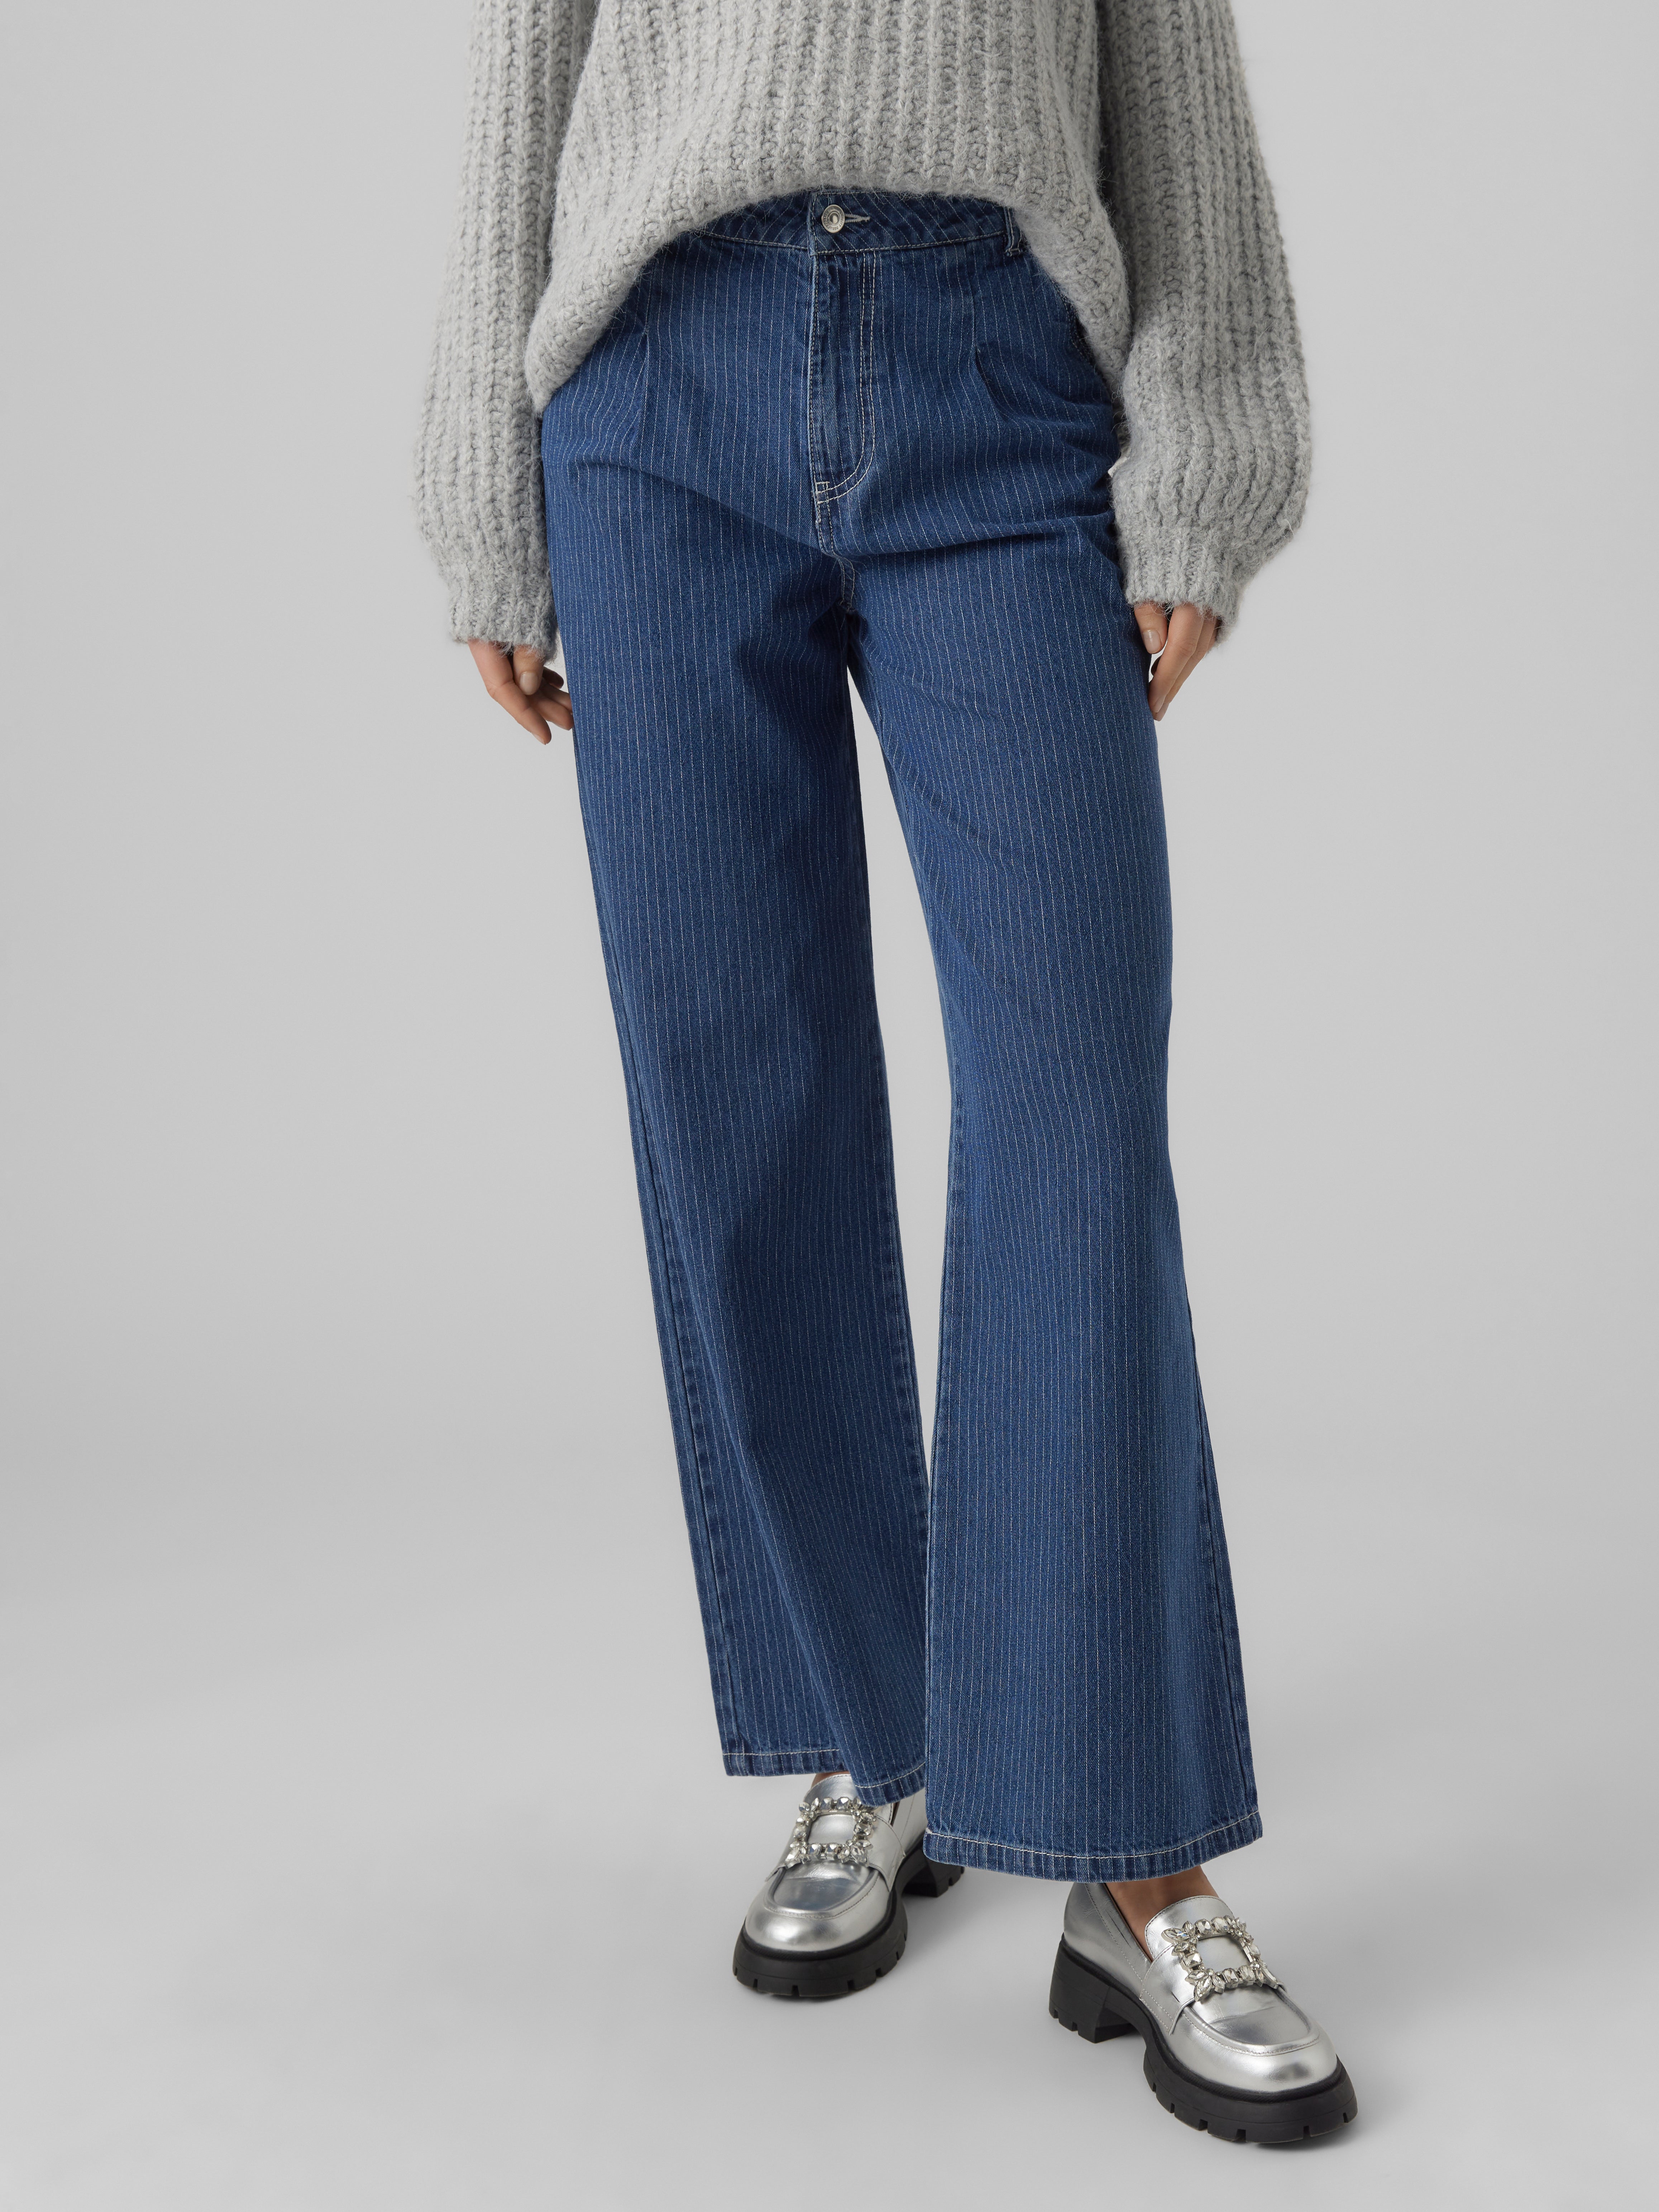 Loose Fit Jeans for Women | VERO MODA